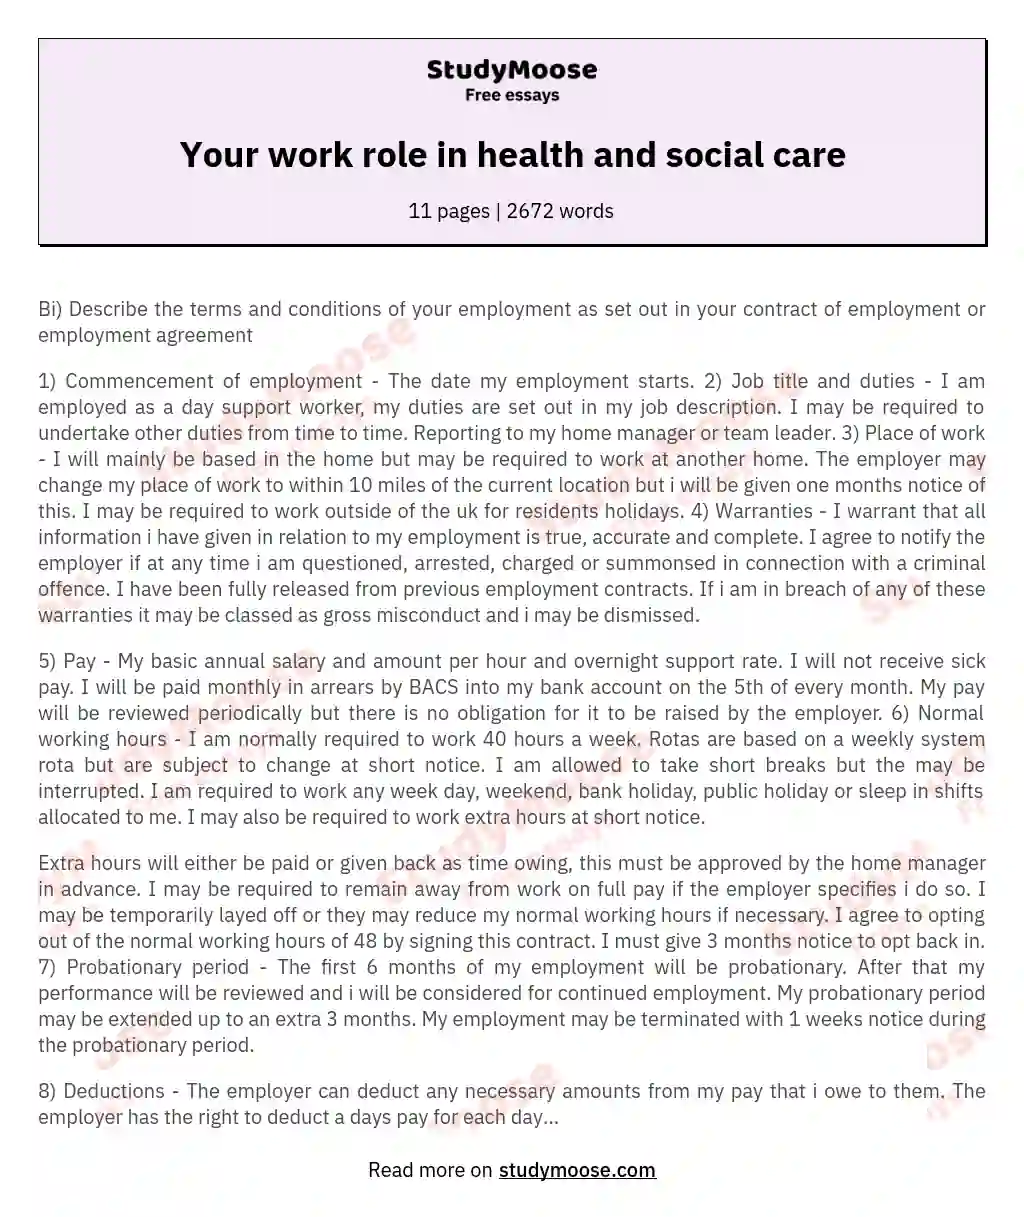 Your work role in health and social care